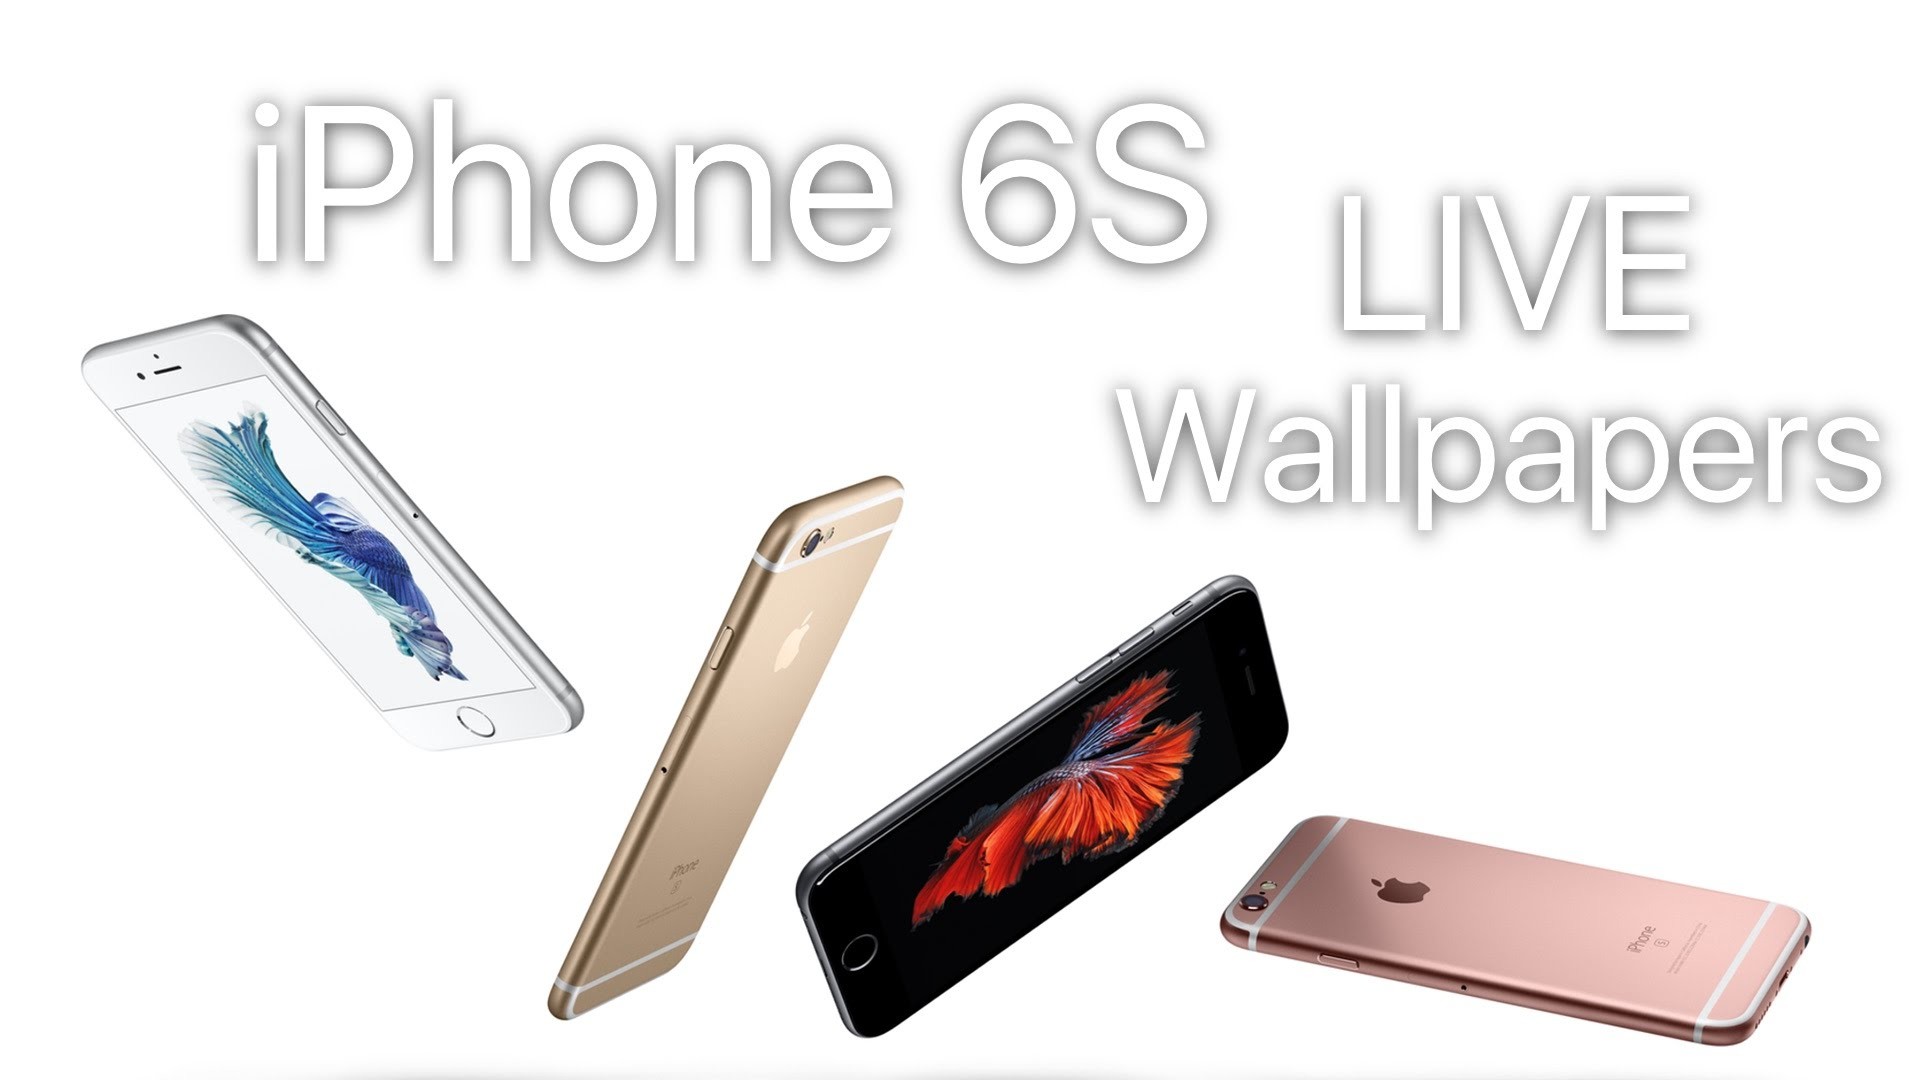 Get Iphone 6s Live Wallpapers On Ios 8 Devices - Apple Marketing Iphone 6s - HD Wallpaper 